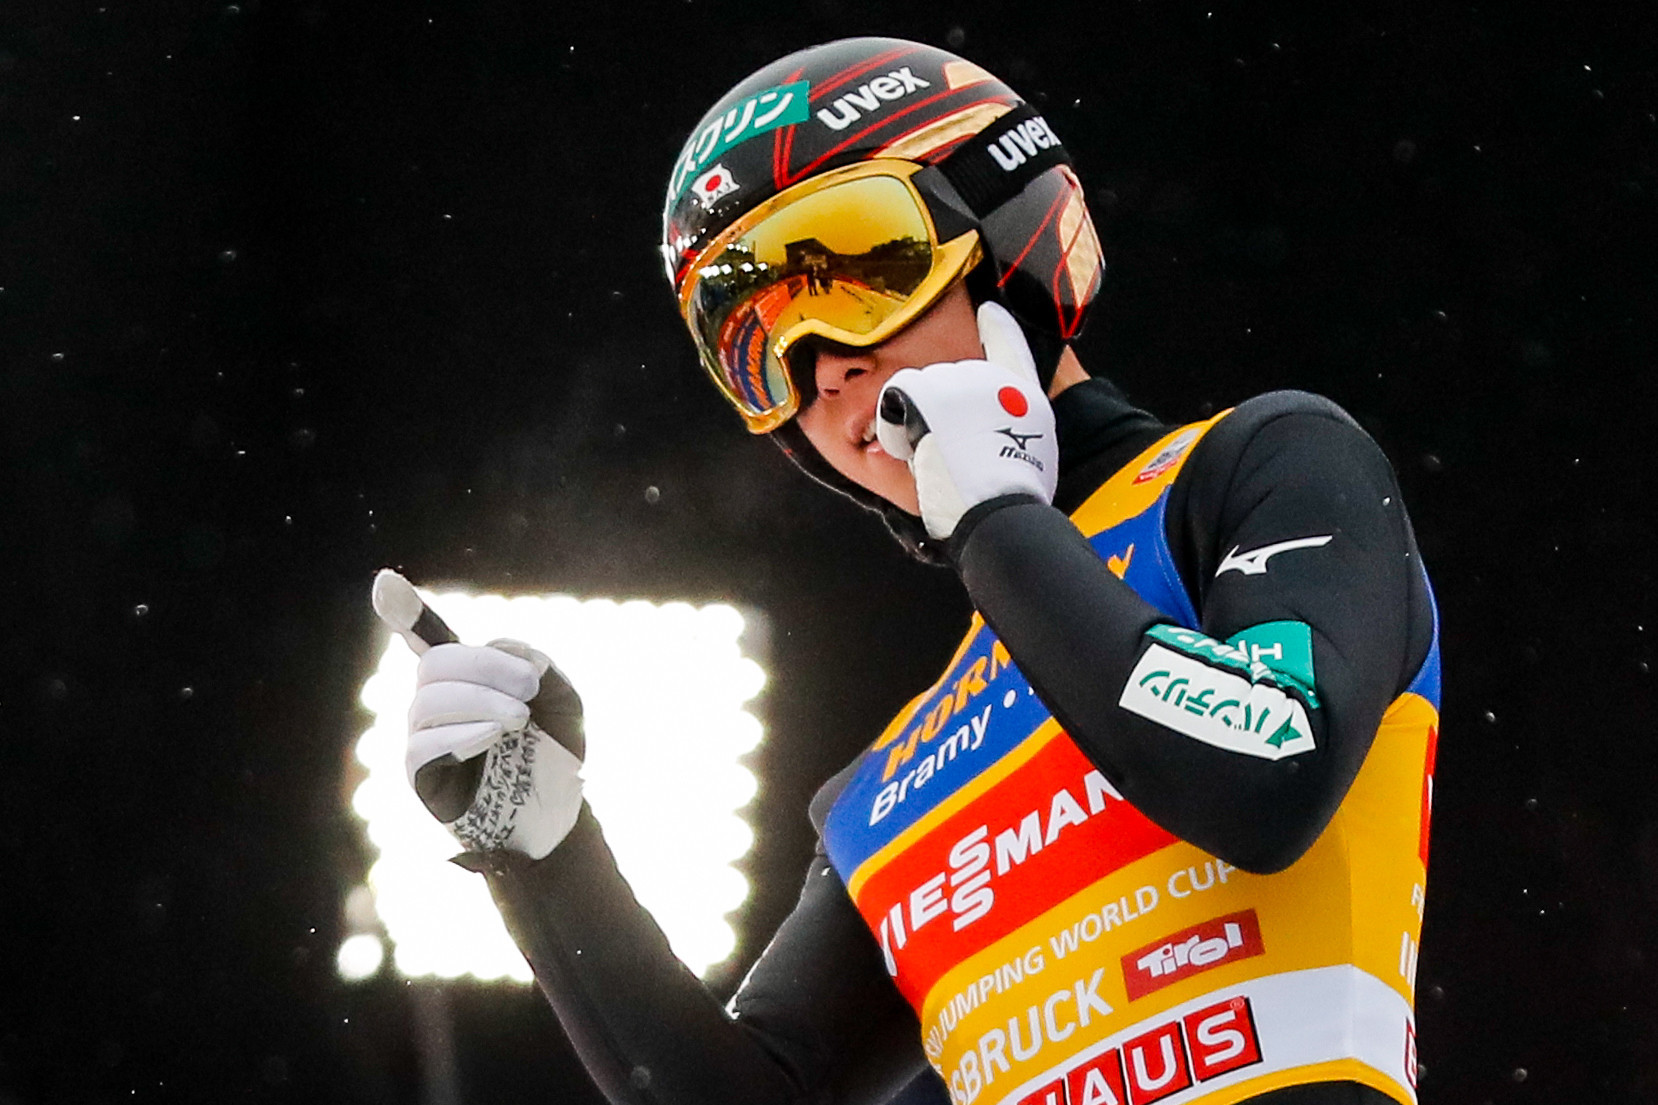 Ryoyu Kobayashi secured a third straight victory at the Four Hills event in Innsbruck ©Getty Images